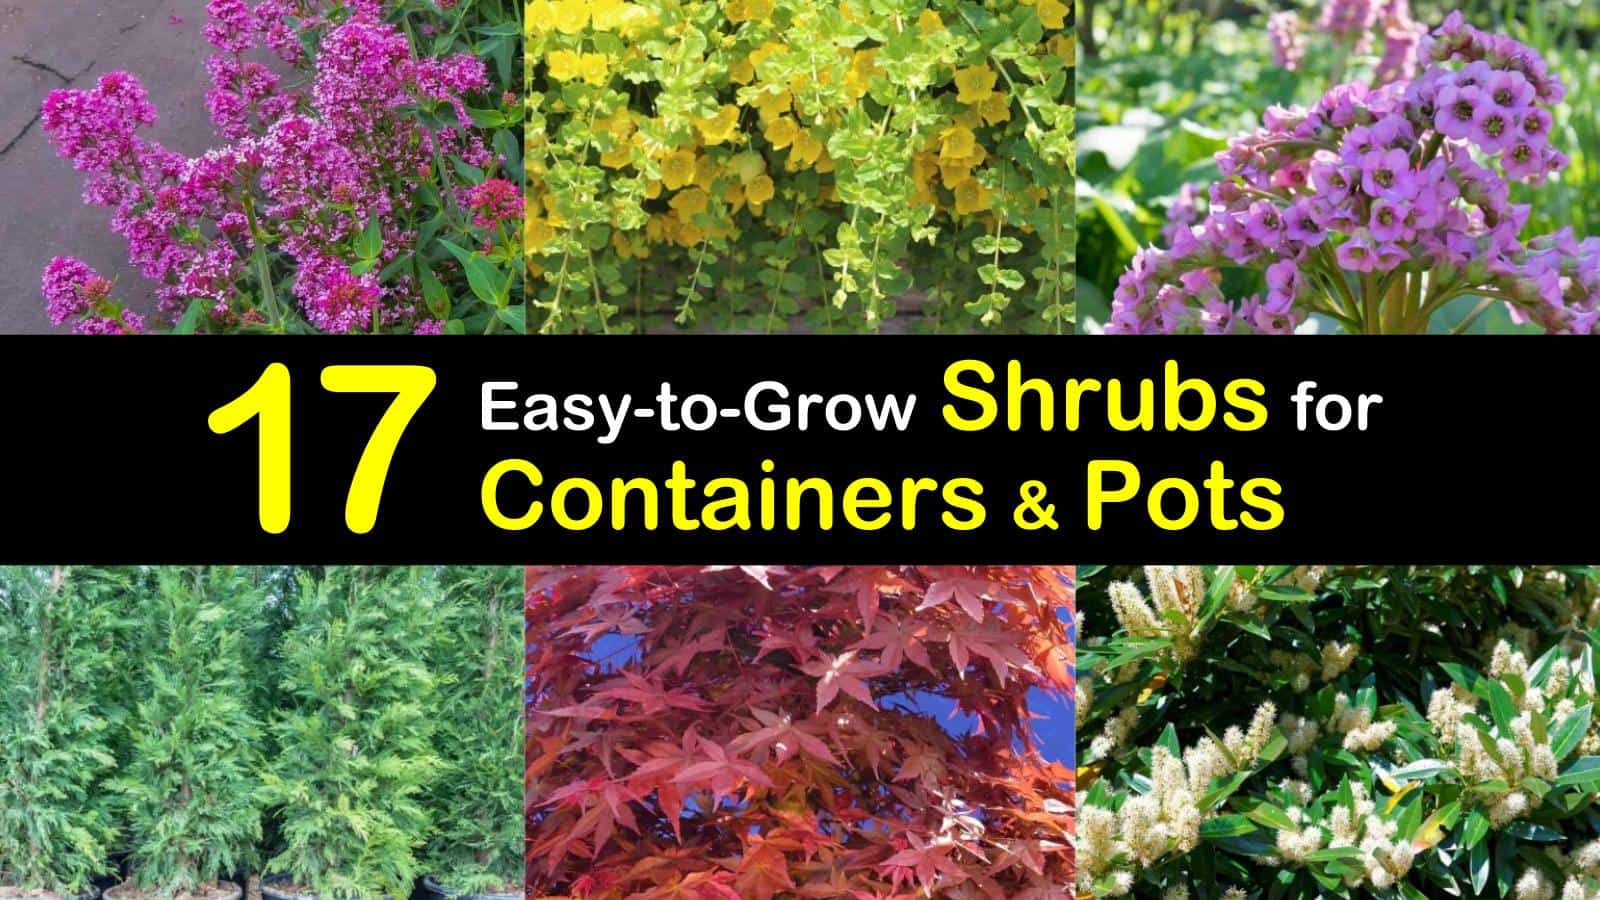 shrubs for containers titleimg1